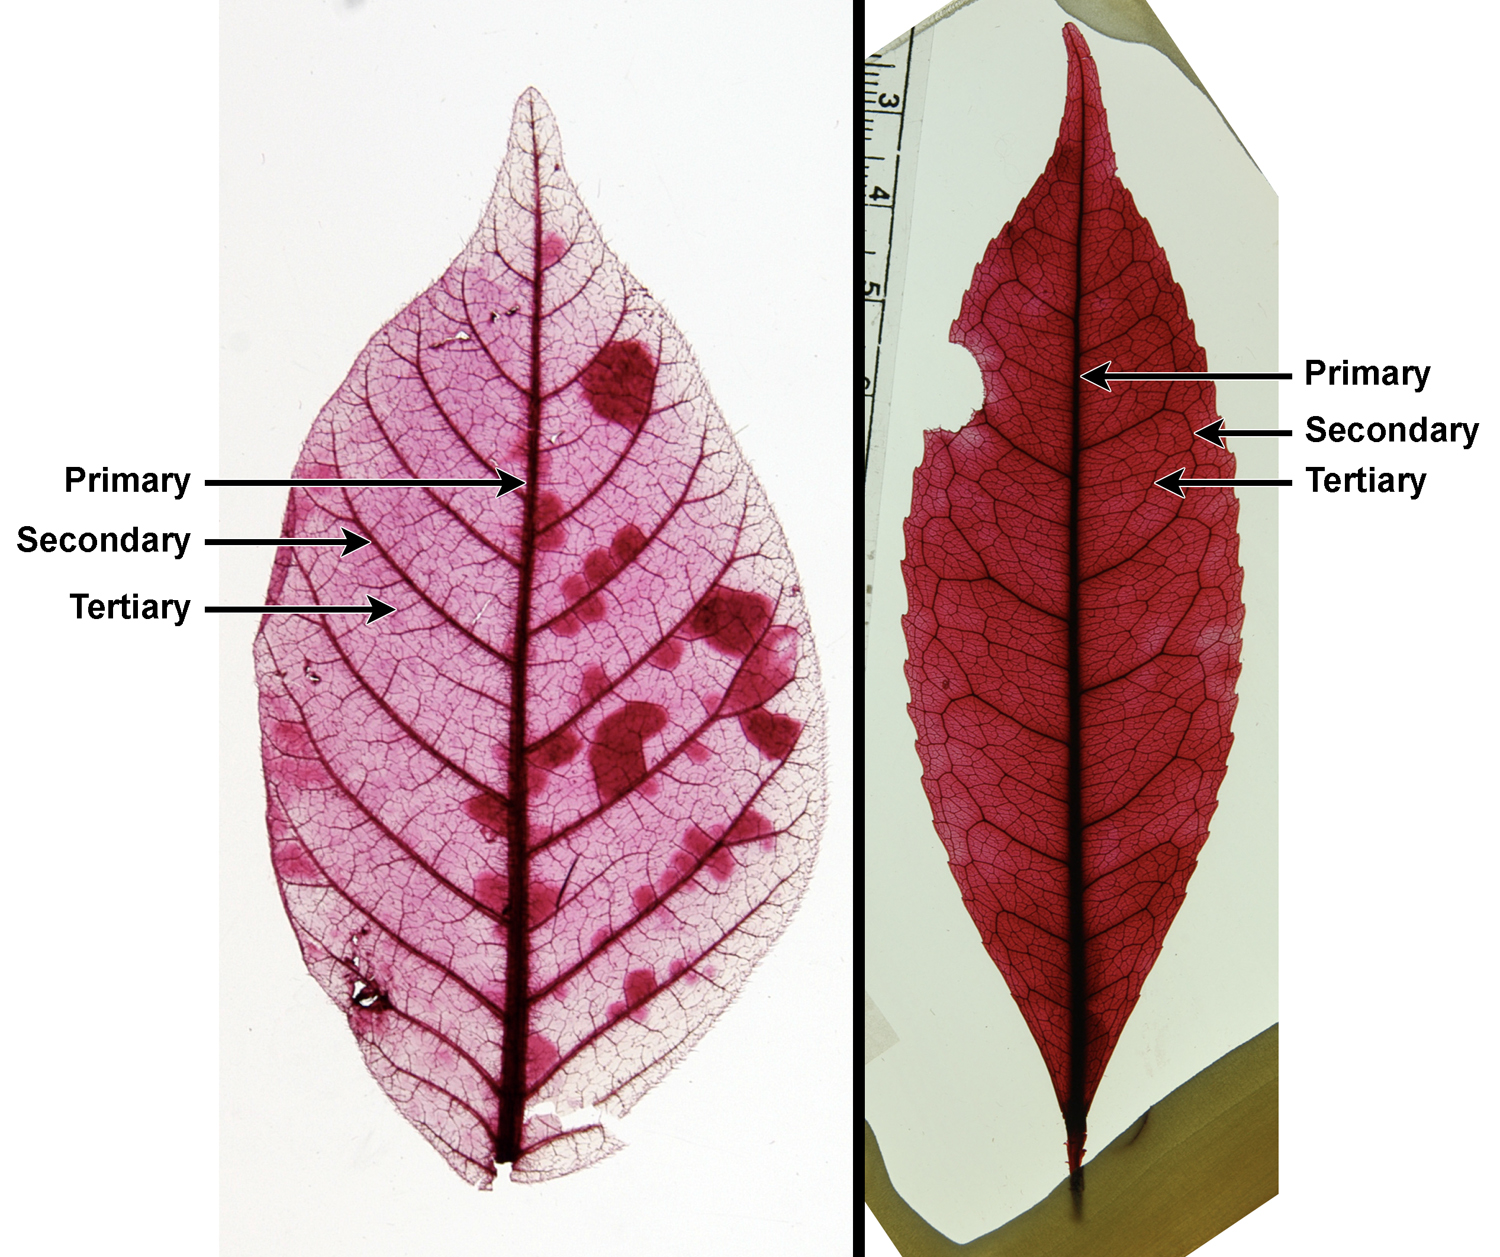 2-Panel photographic figure of cleared leaves. Panel 1: Leaf of sumac showing ramified intercostal tertiary venation. Panel 2: Image of Turpinia leaf showing reticulate tertiary venation.